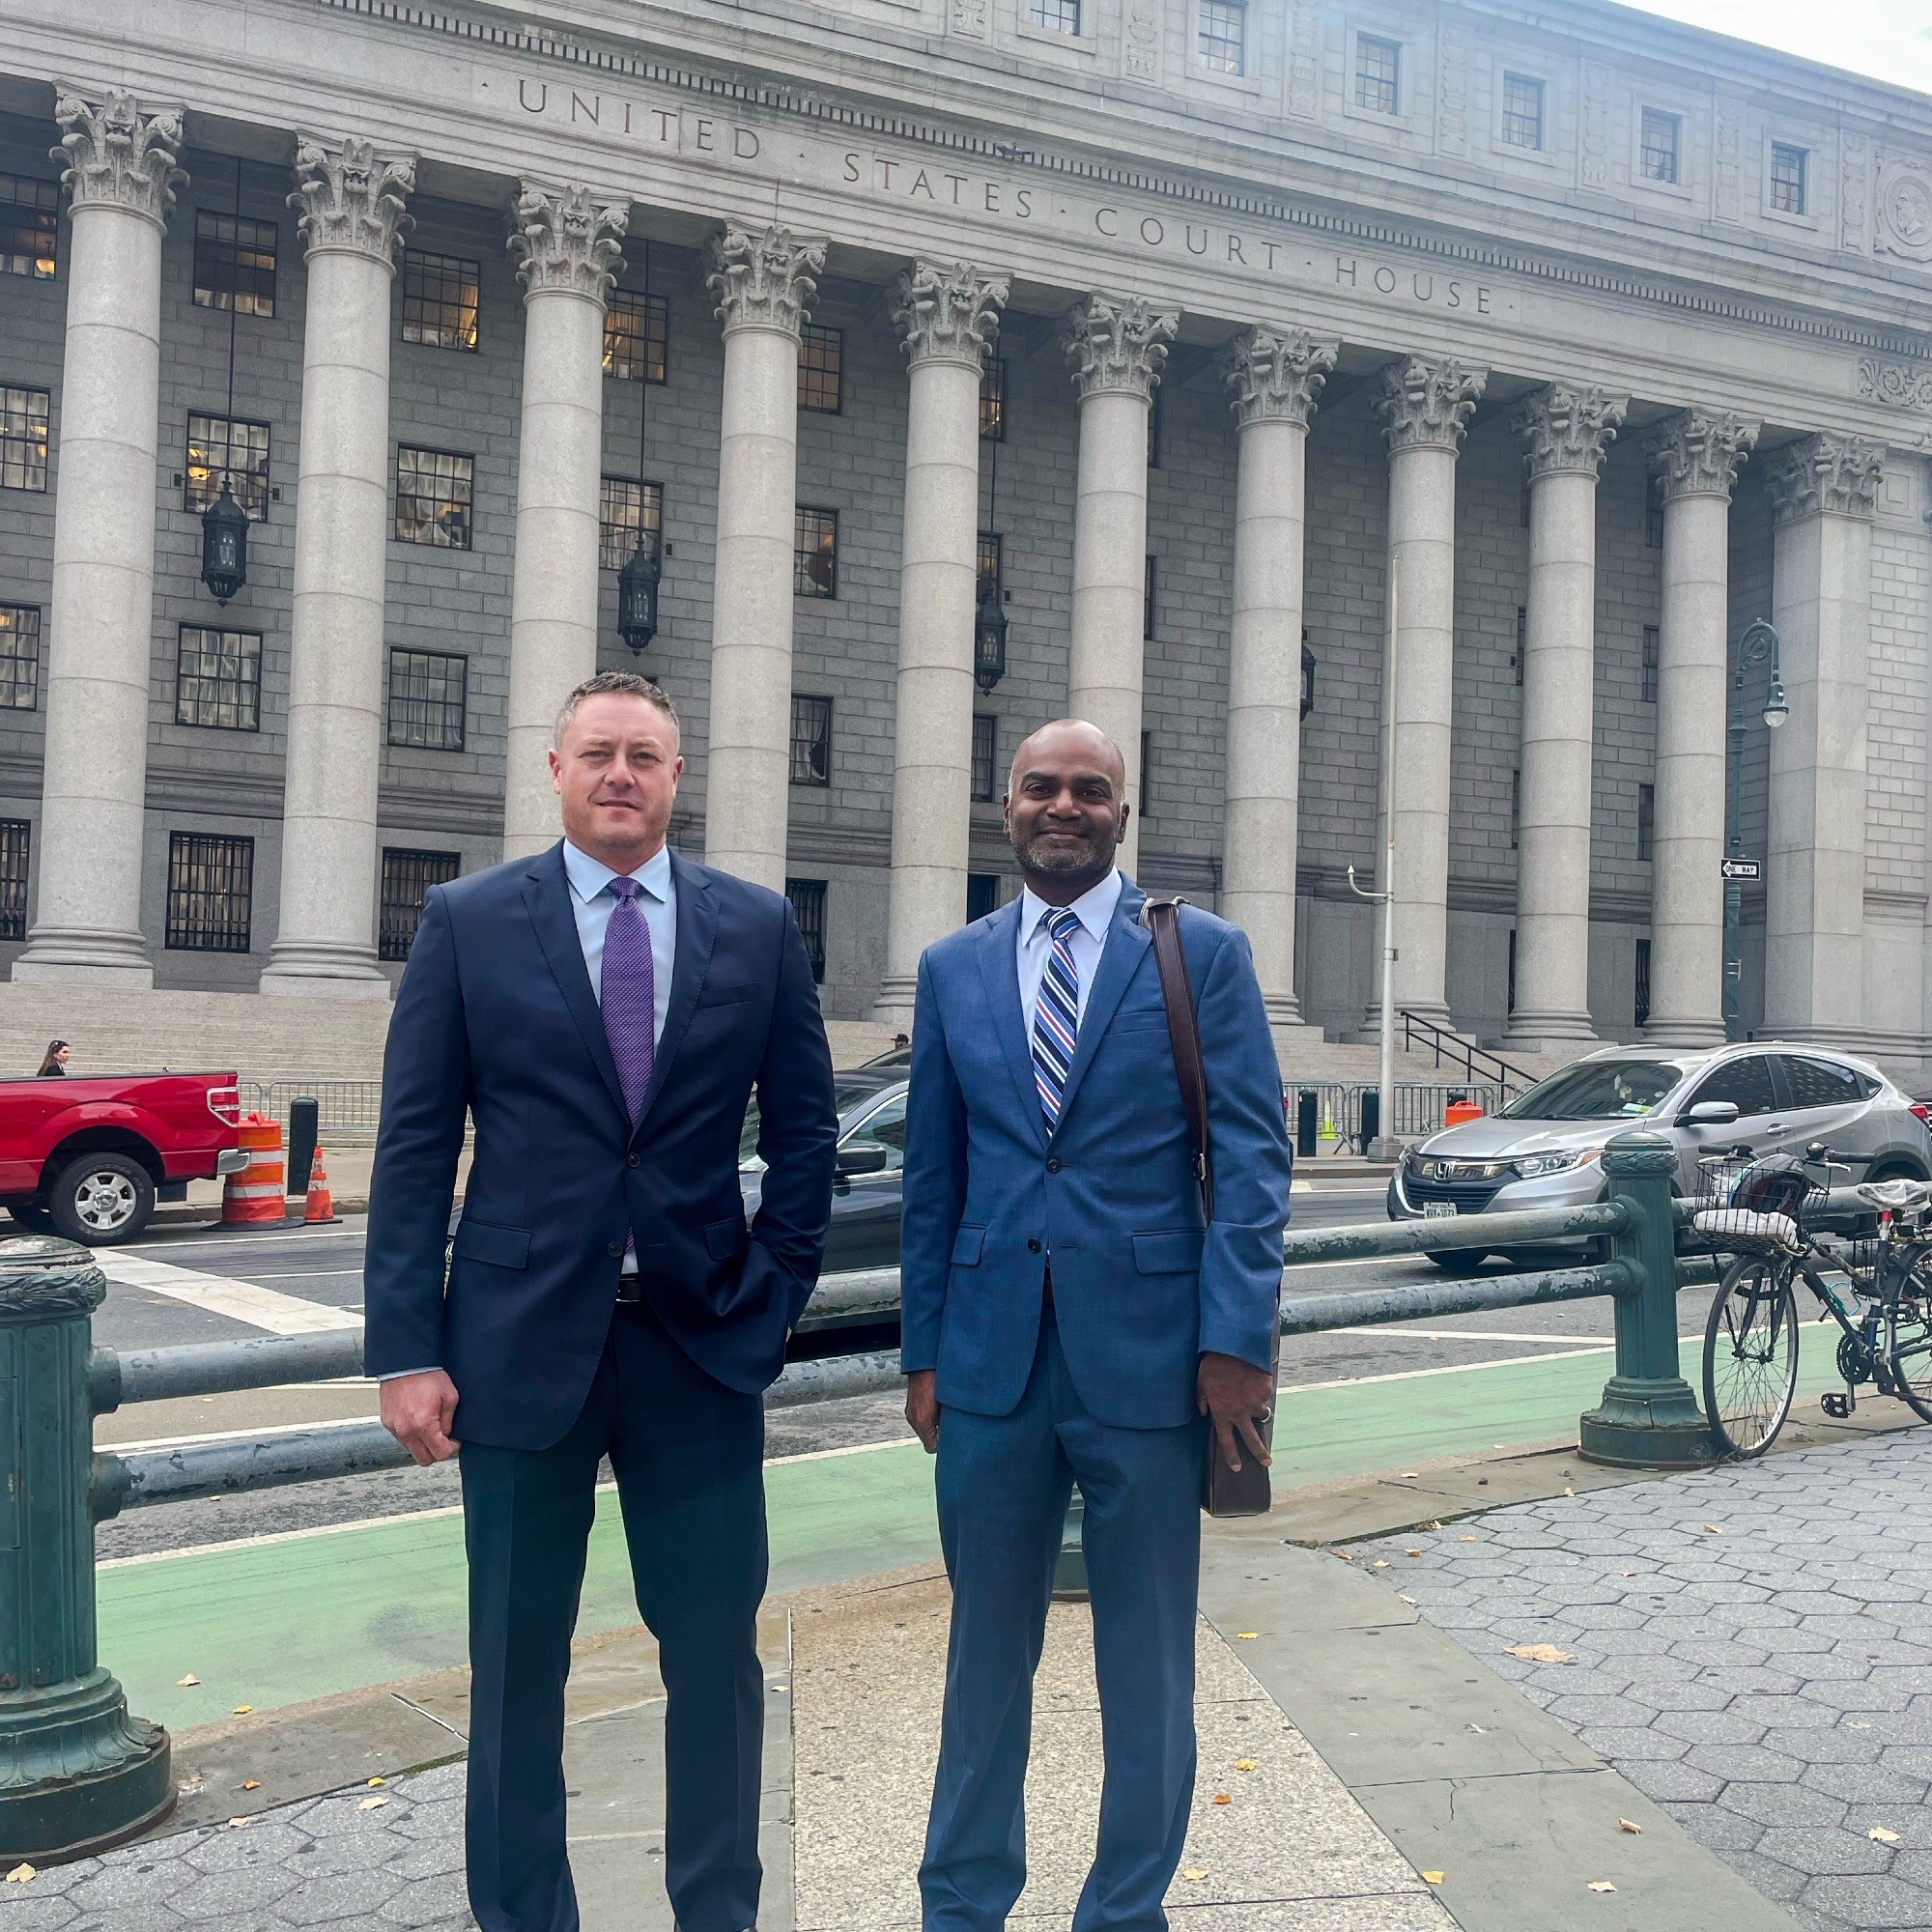 Attorneys Brett Leitner and Justin Varughese outside the US Court of Appeals after the argument